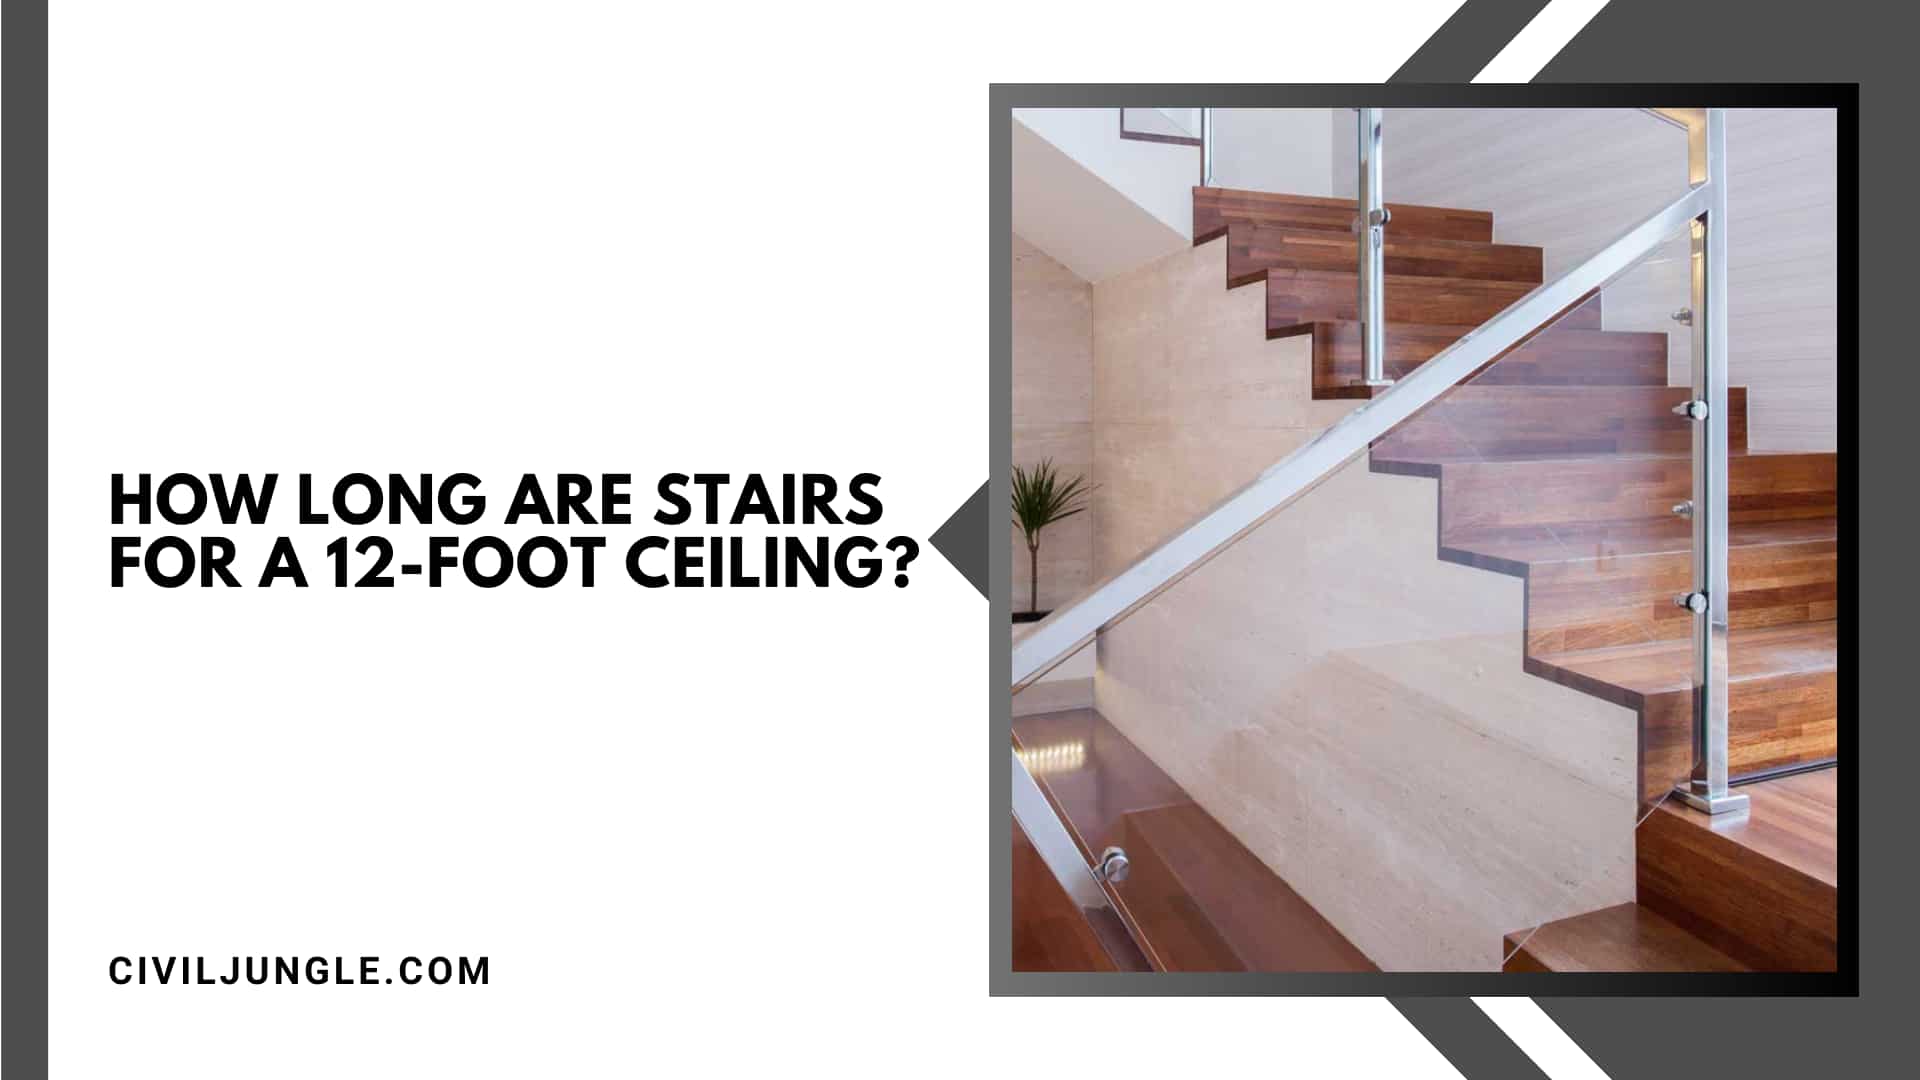 How Long Are Stairs for a 12-Foot Ceiling?